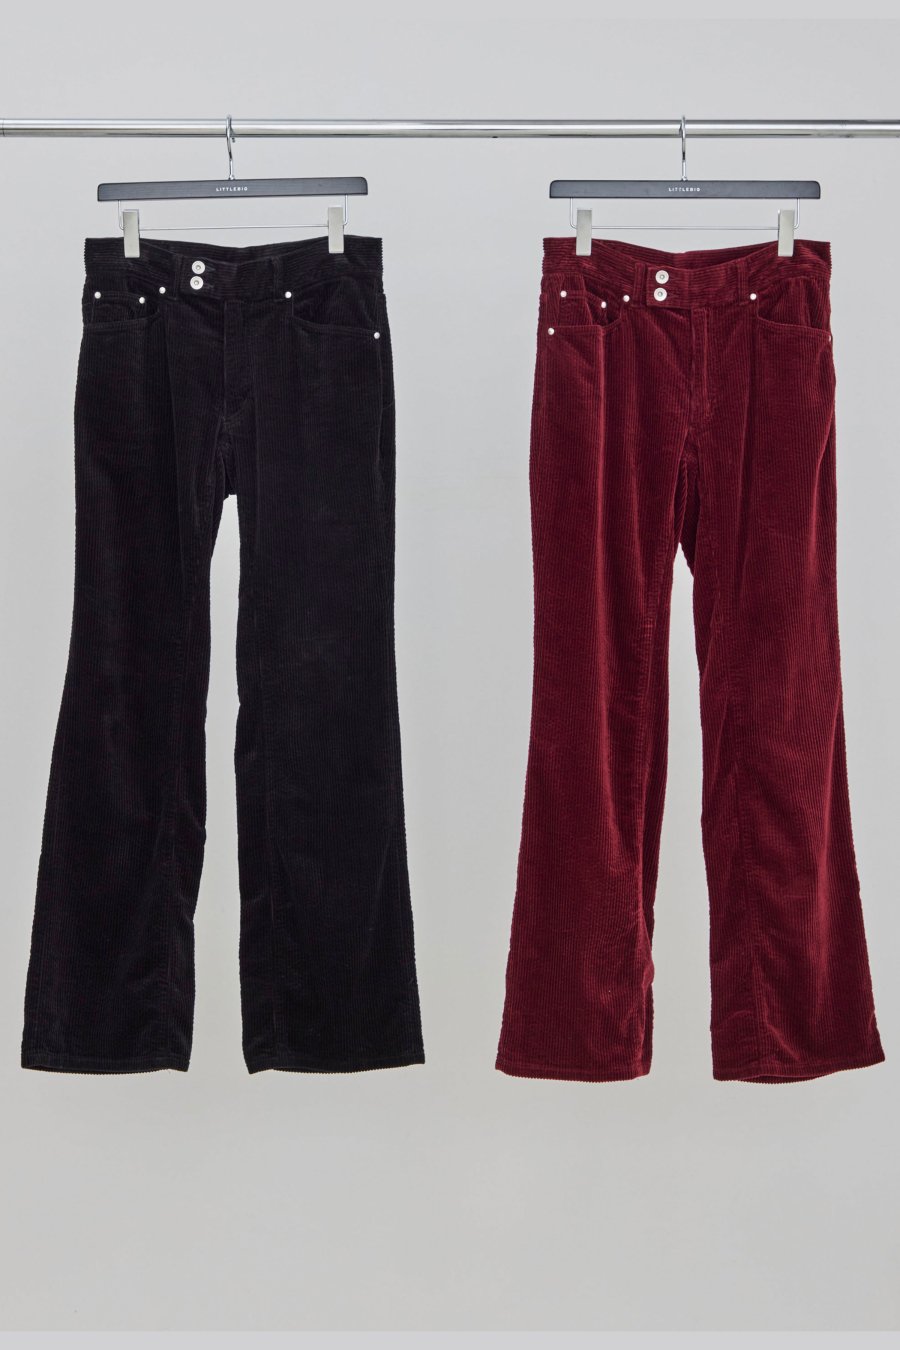 LITTLEBIG  Corduroy Bootcut Pants(Black or Bordeaux)<img class='new_mark_img2' src='https://img.shop-pro.jp/img/new/icons15.gif' style='border:none;display:inline;margin:0px;padding:0px;width:auto;' />